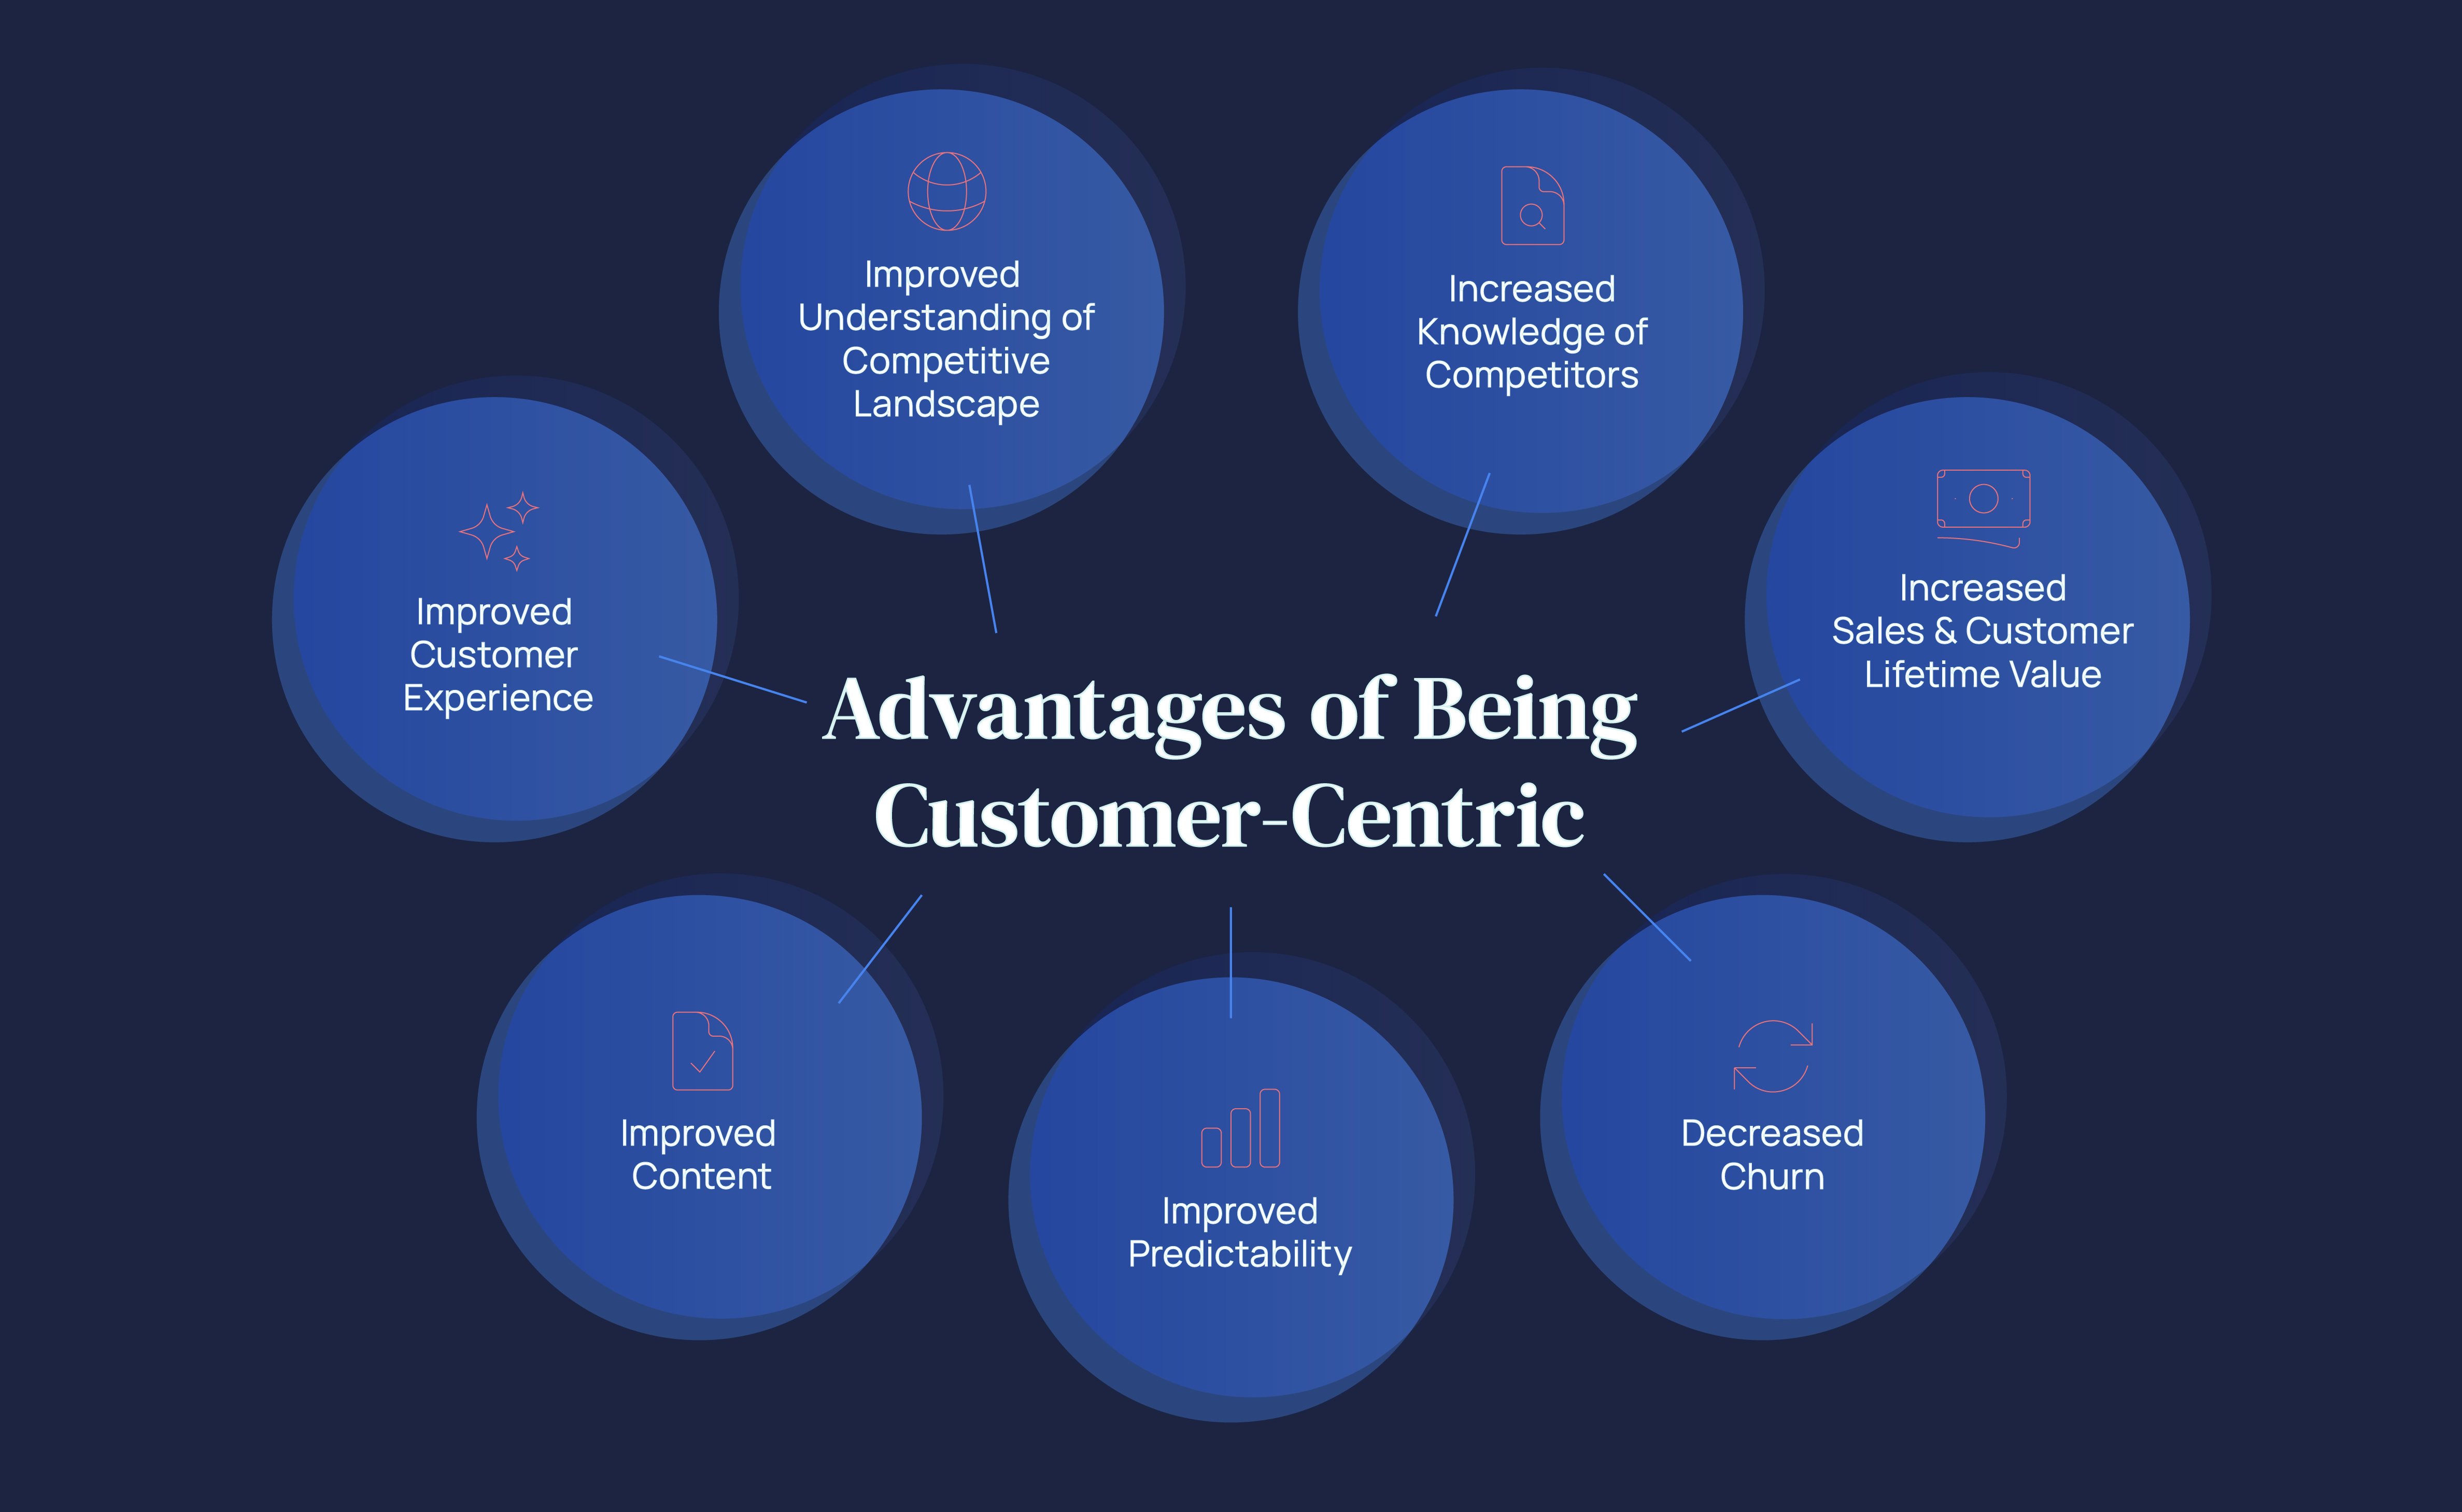 results of having a customer centric approach and how important it is to know your consumer's needs